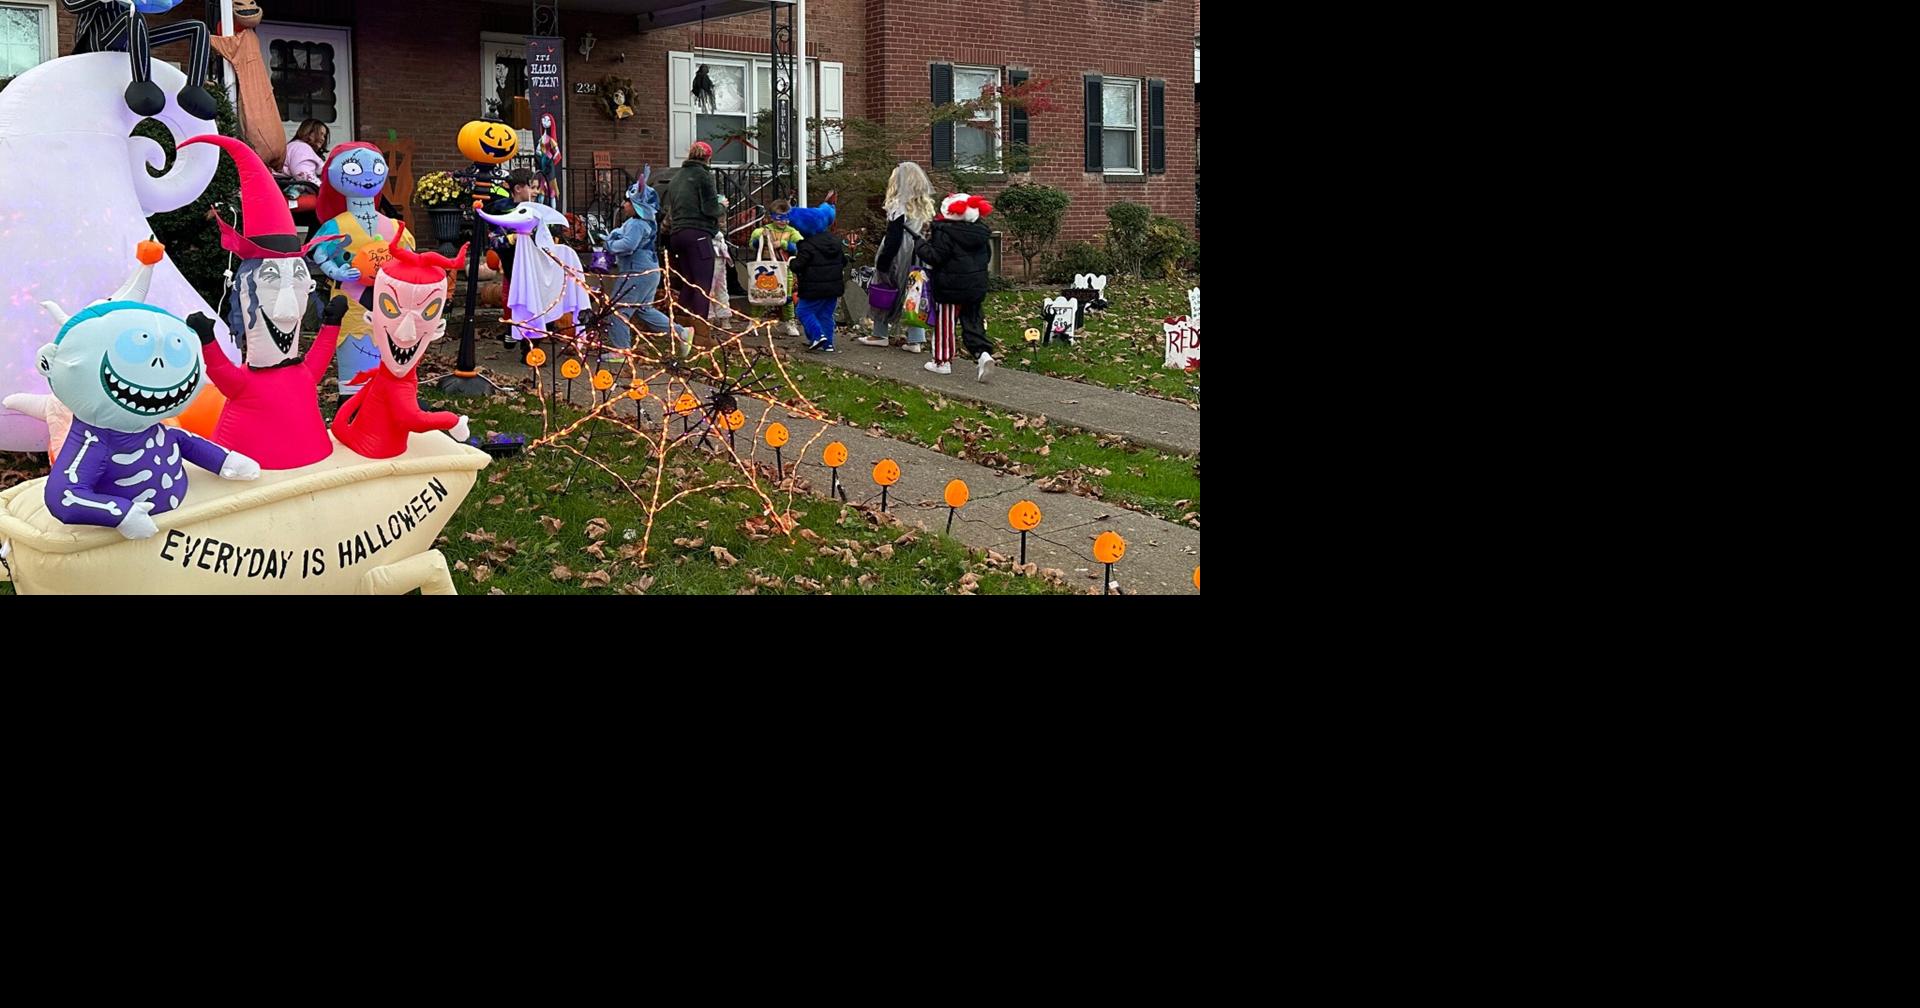 Trick-or-treaters make rounds in West Reading | Berks Regional News ...